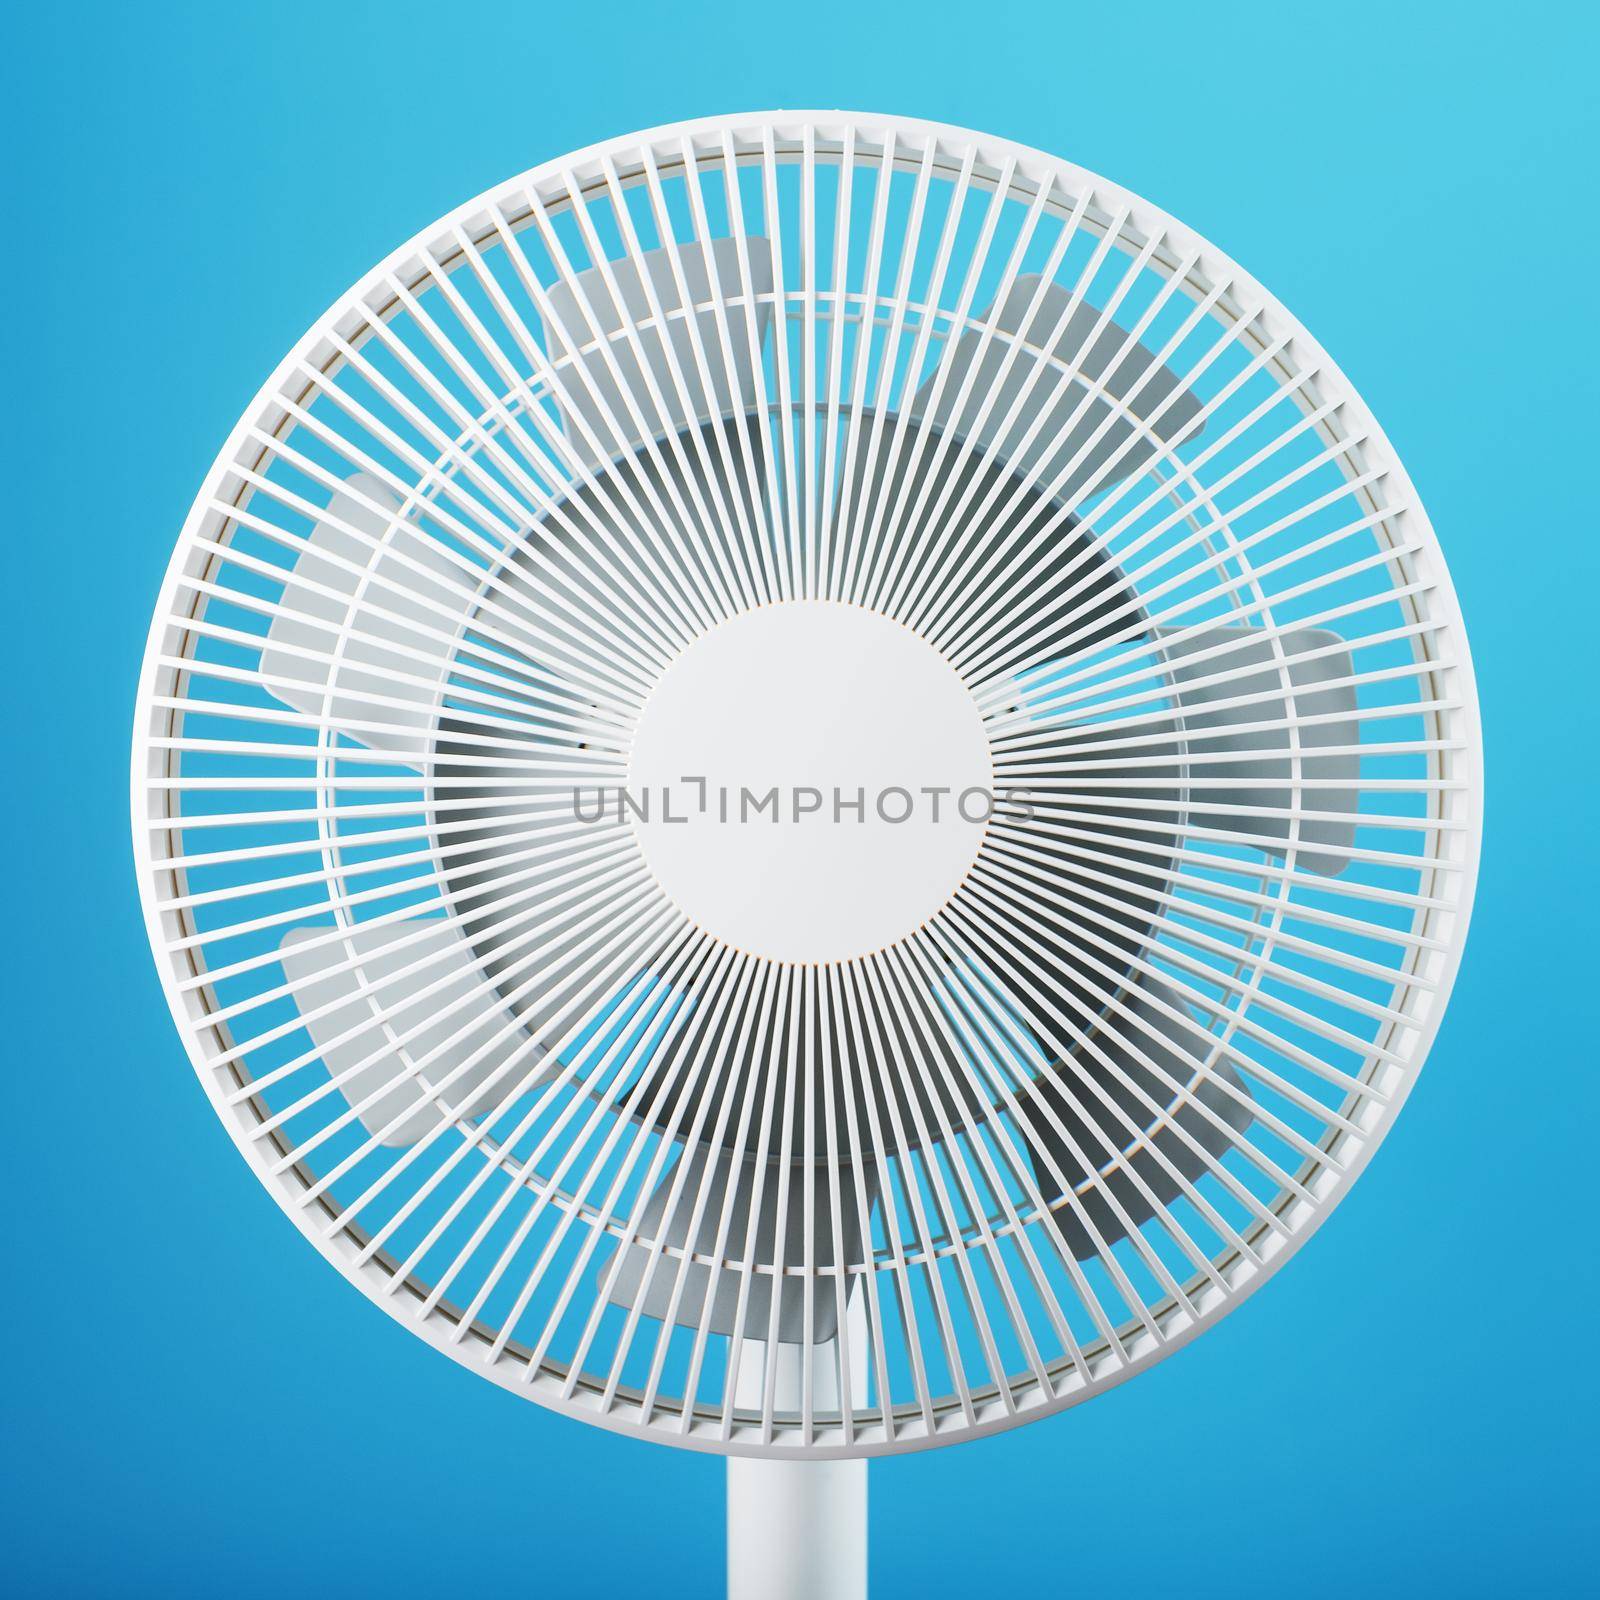 A high-tech white electric fan with a modern design for cooling the room on a blue background. Minimalistic style